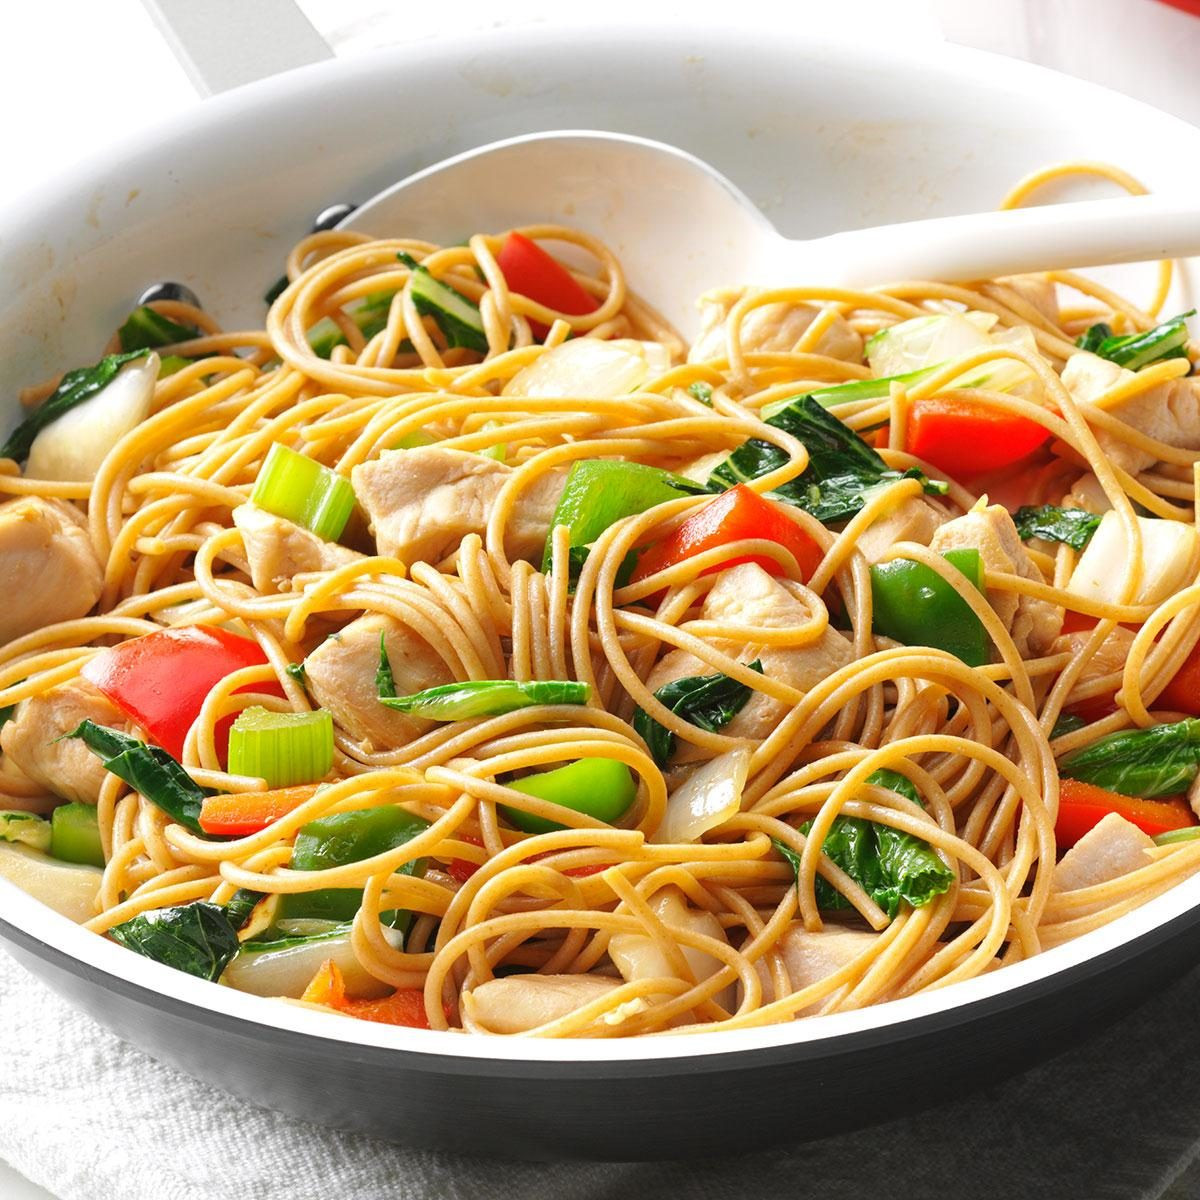 Asian Noodle Stir Fry Recipes
 Chicken Stir Fry with Noodles Recipe